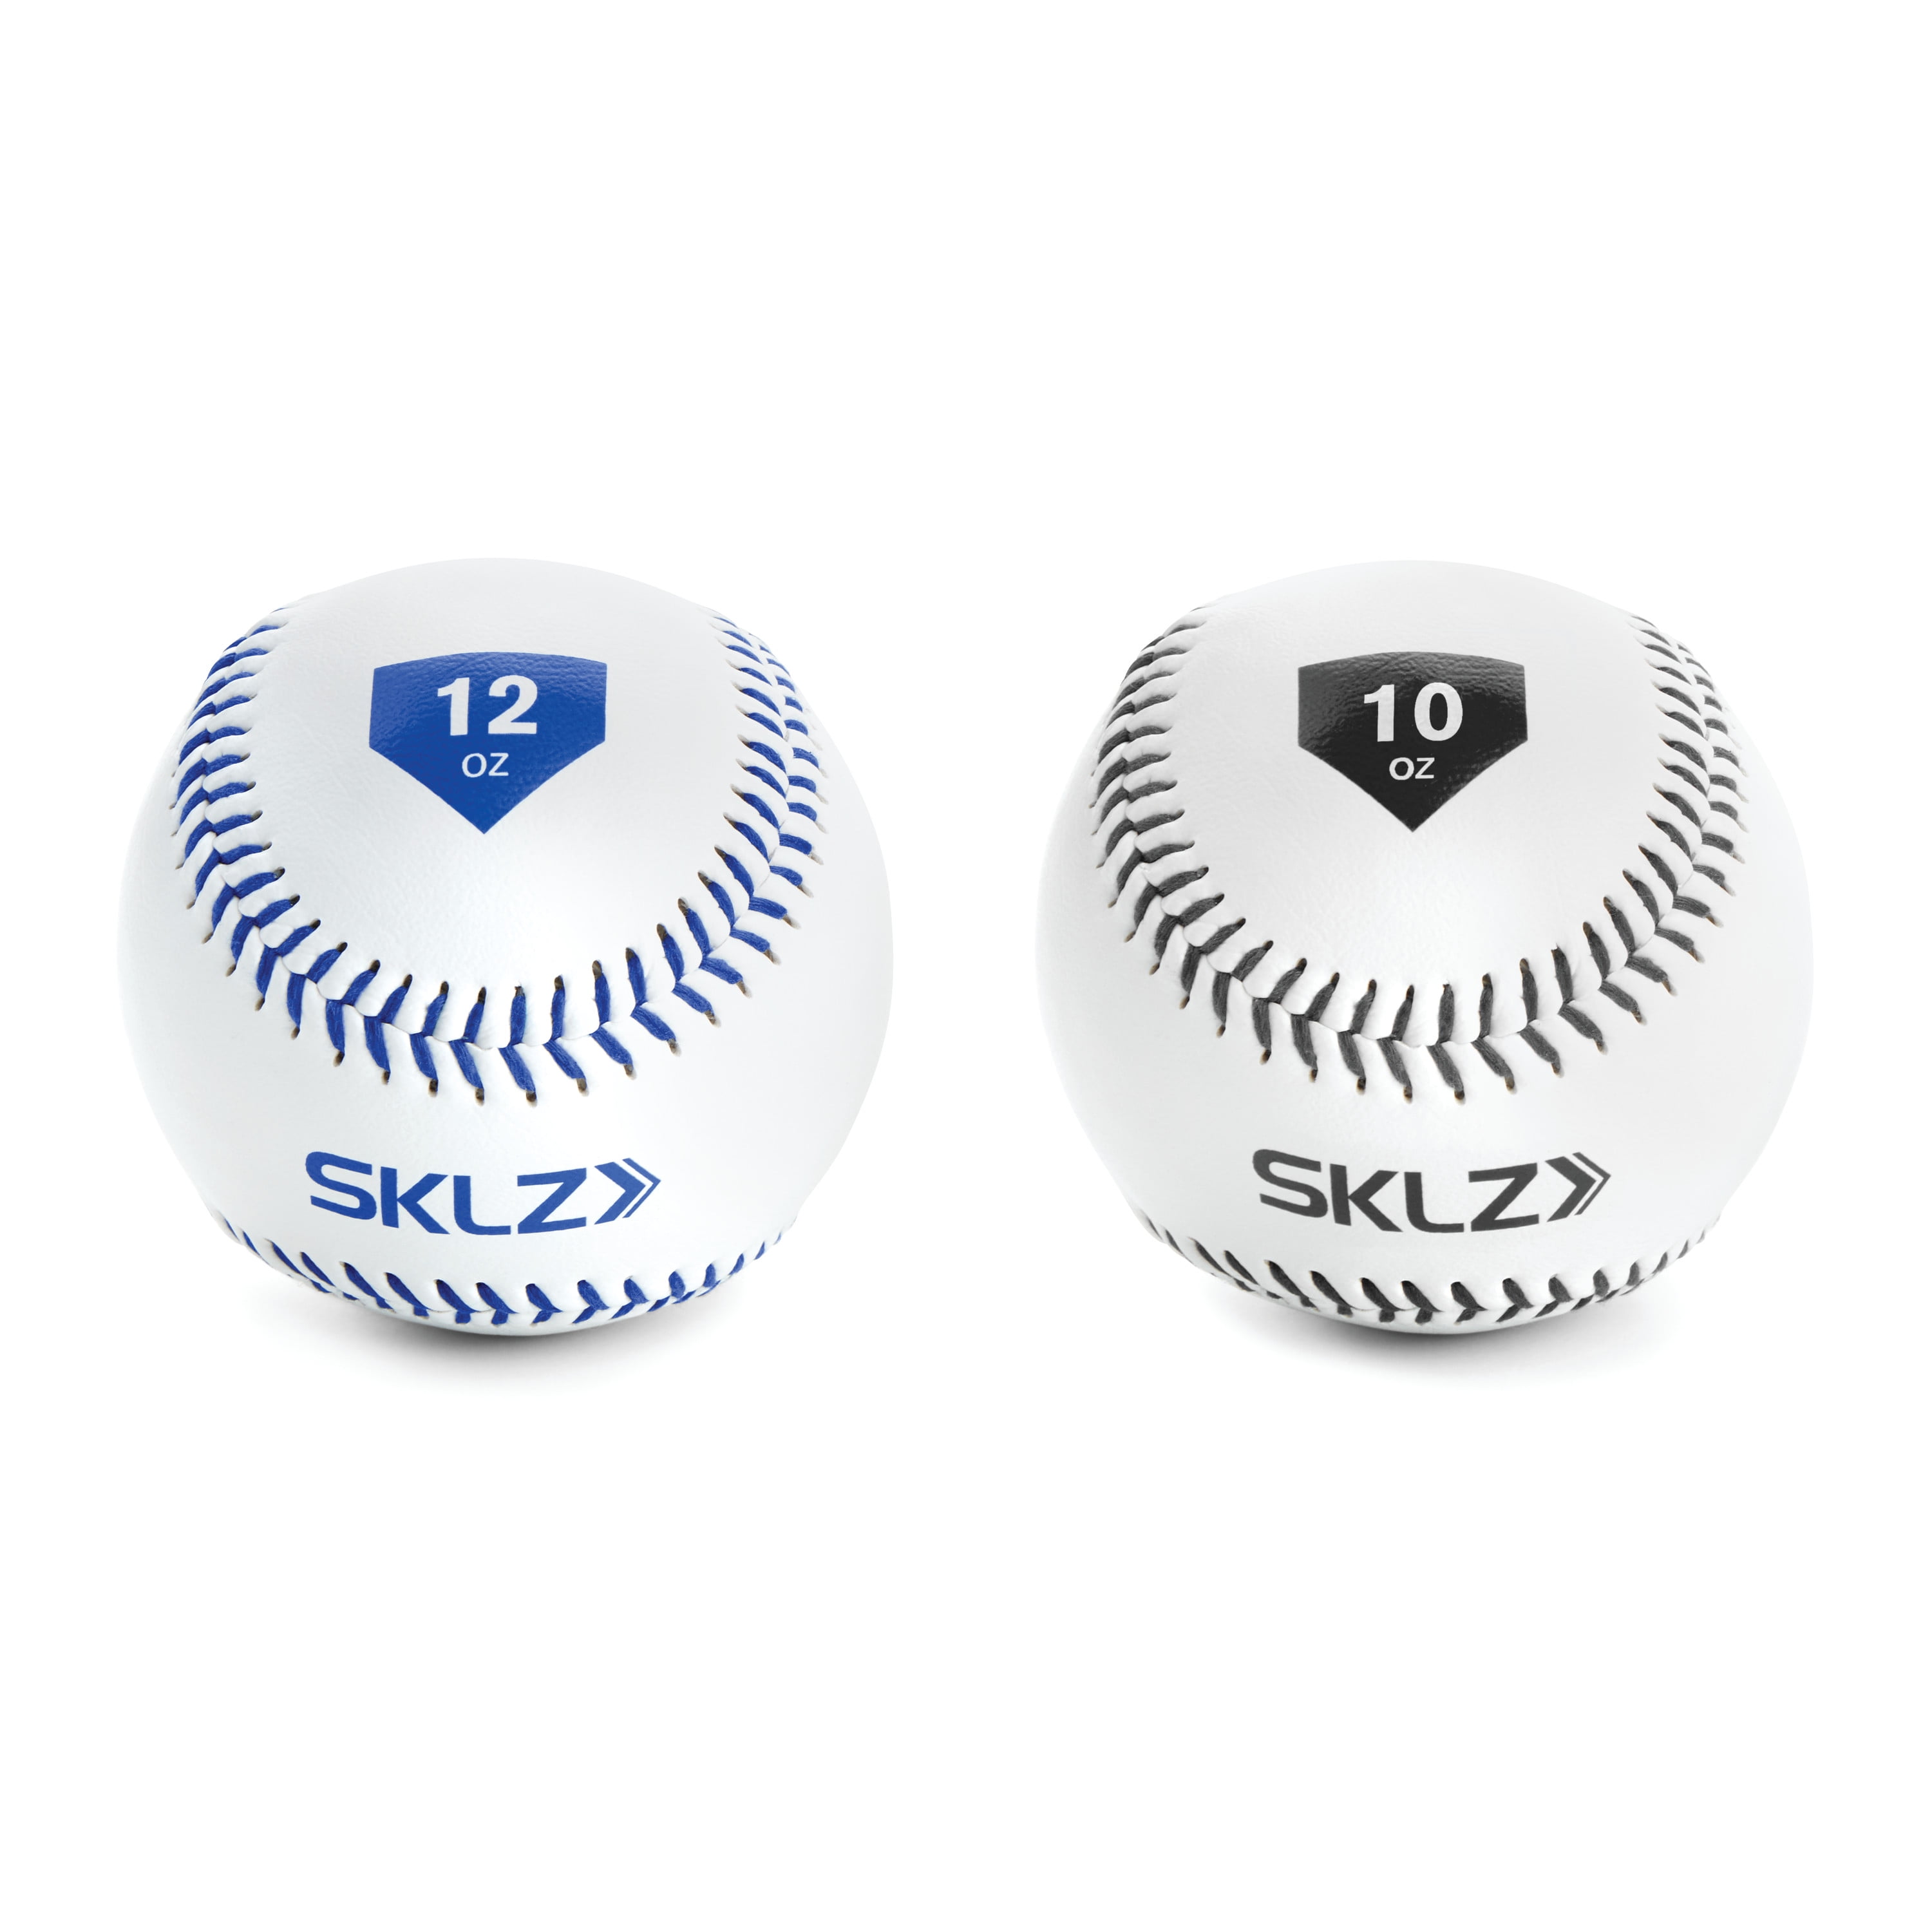 SKLZ Weighted Training Baseballs for Arm Strength Training,10 and 12 OZ, 2 Pack